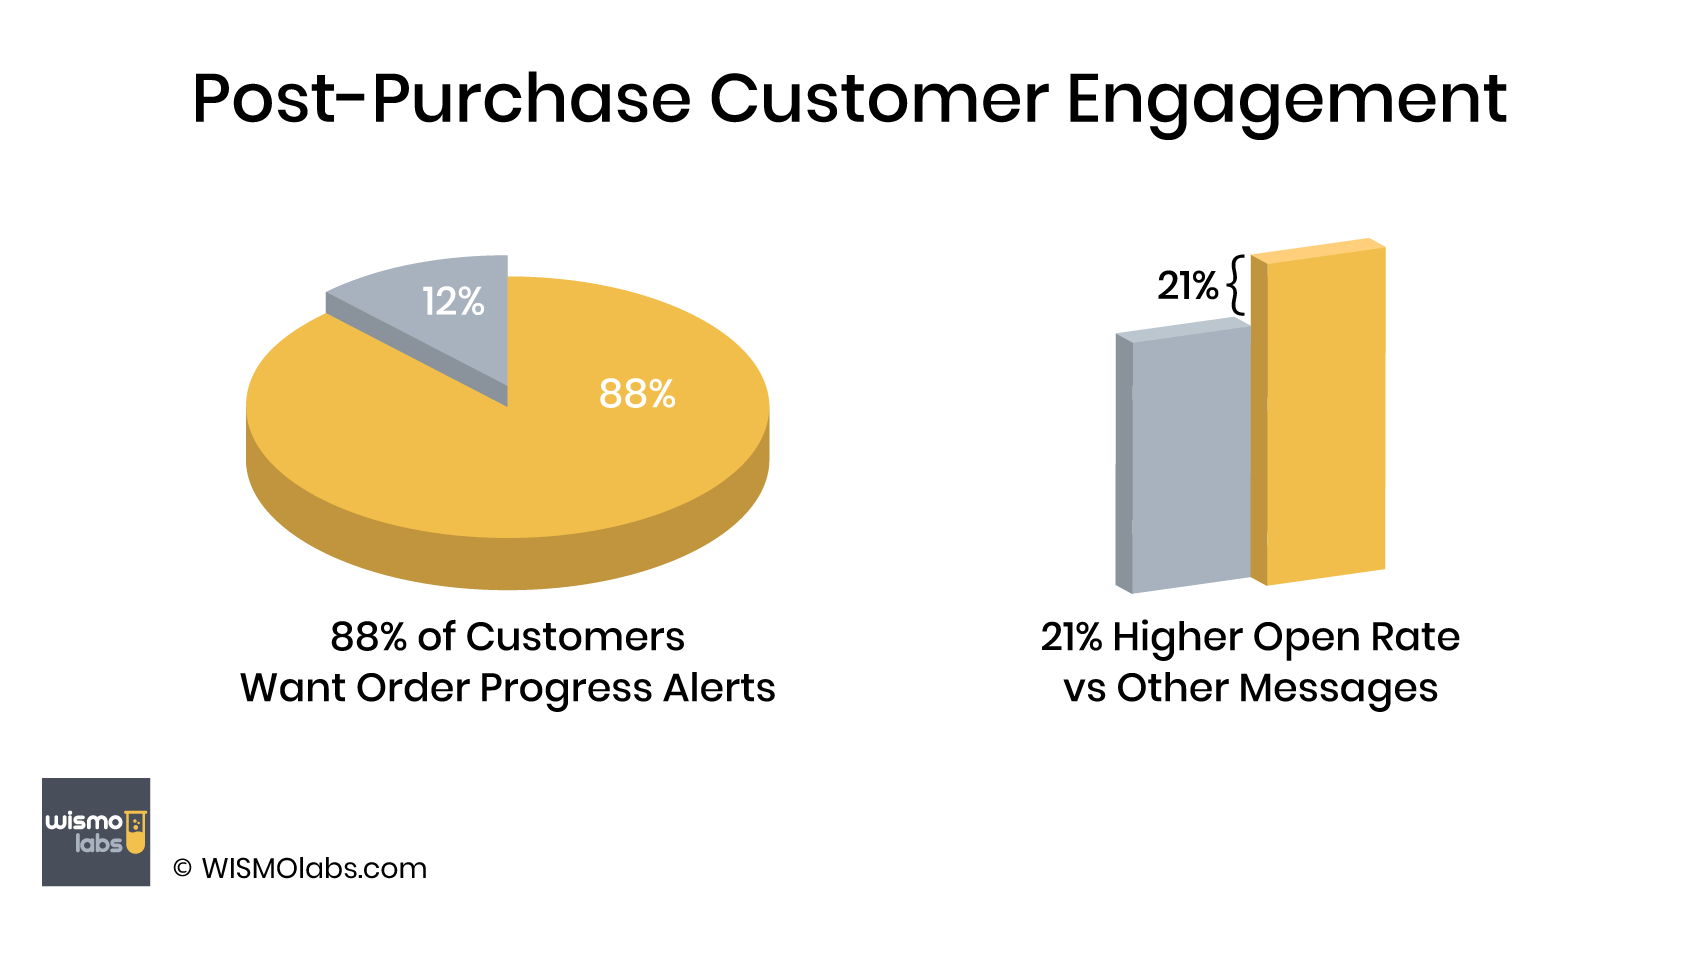 customer engagement during post-purchase journey